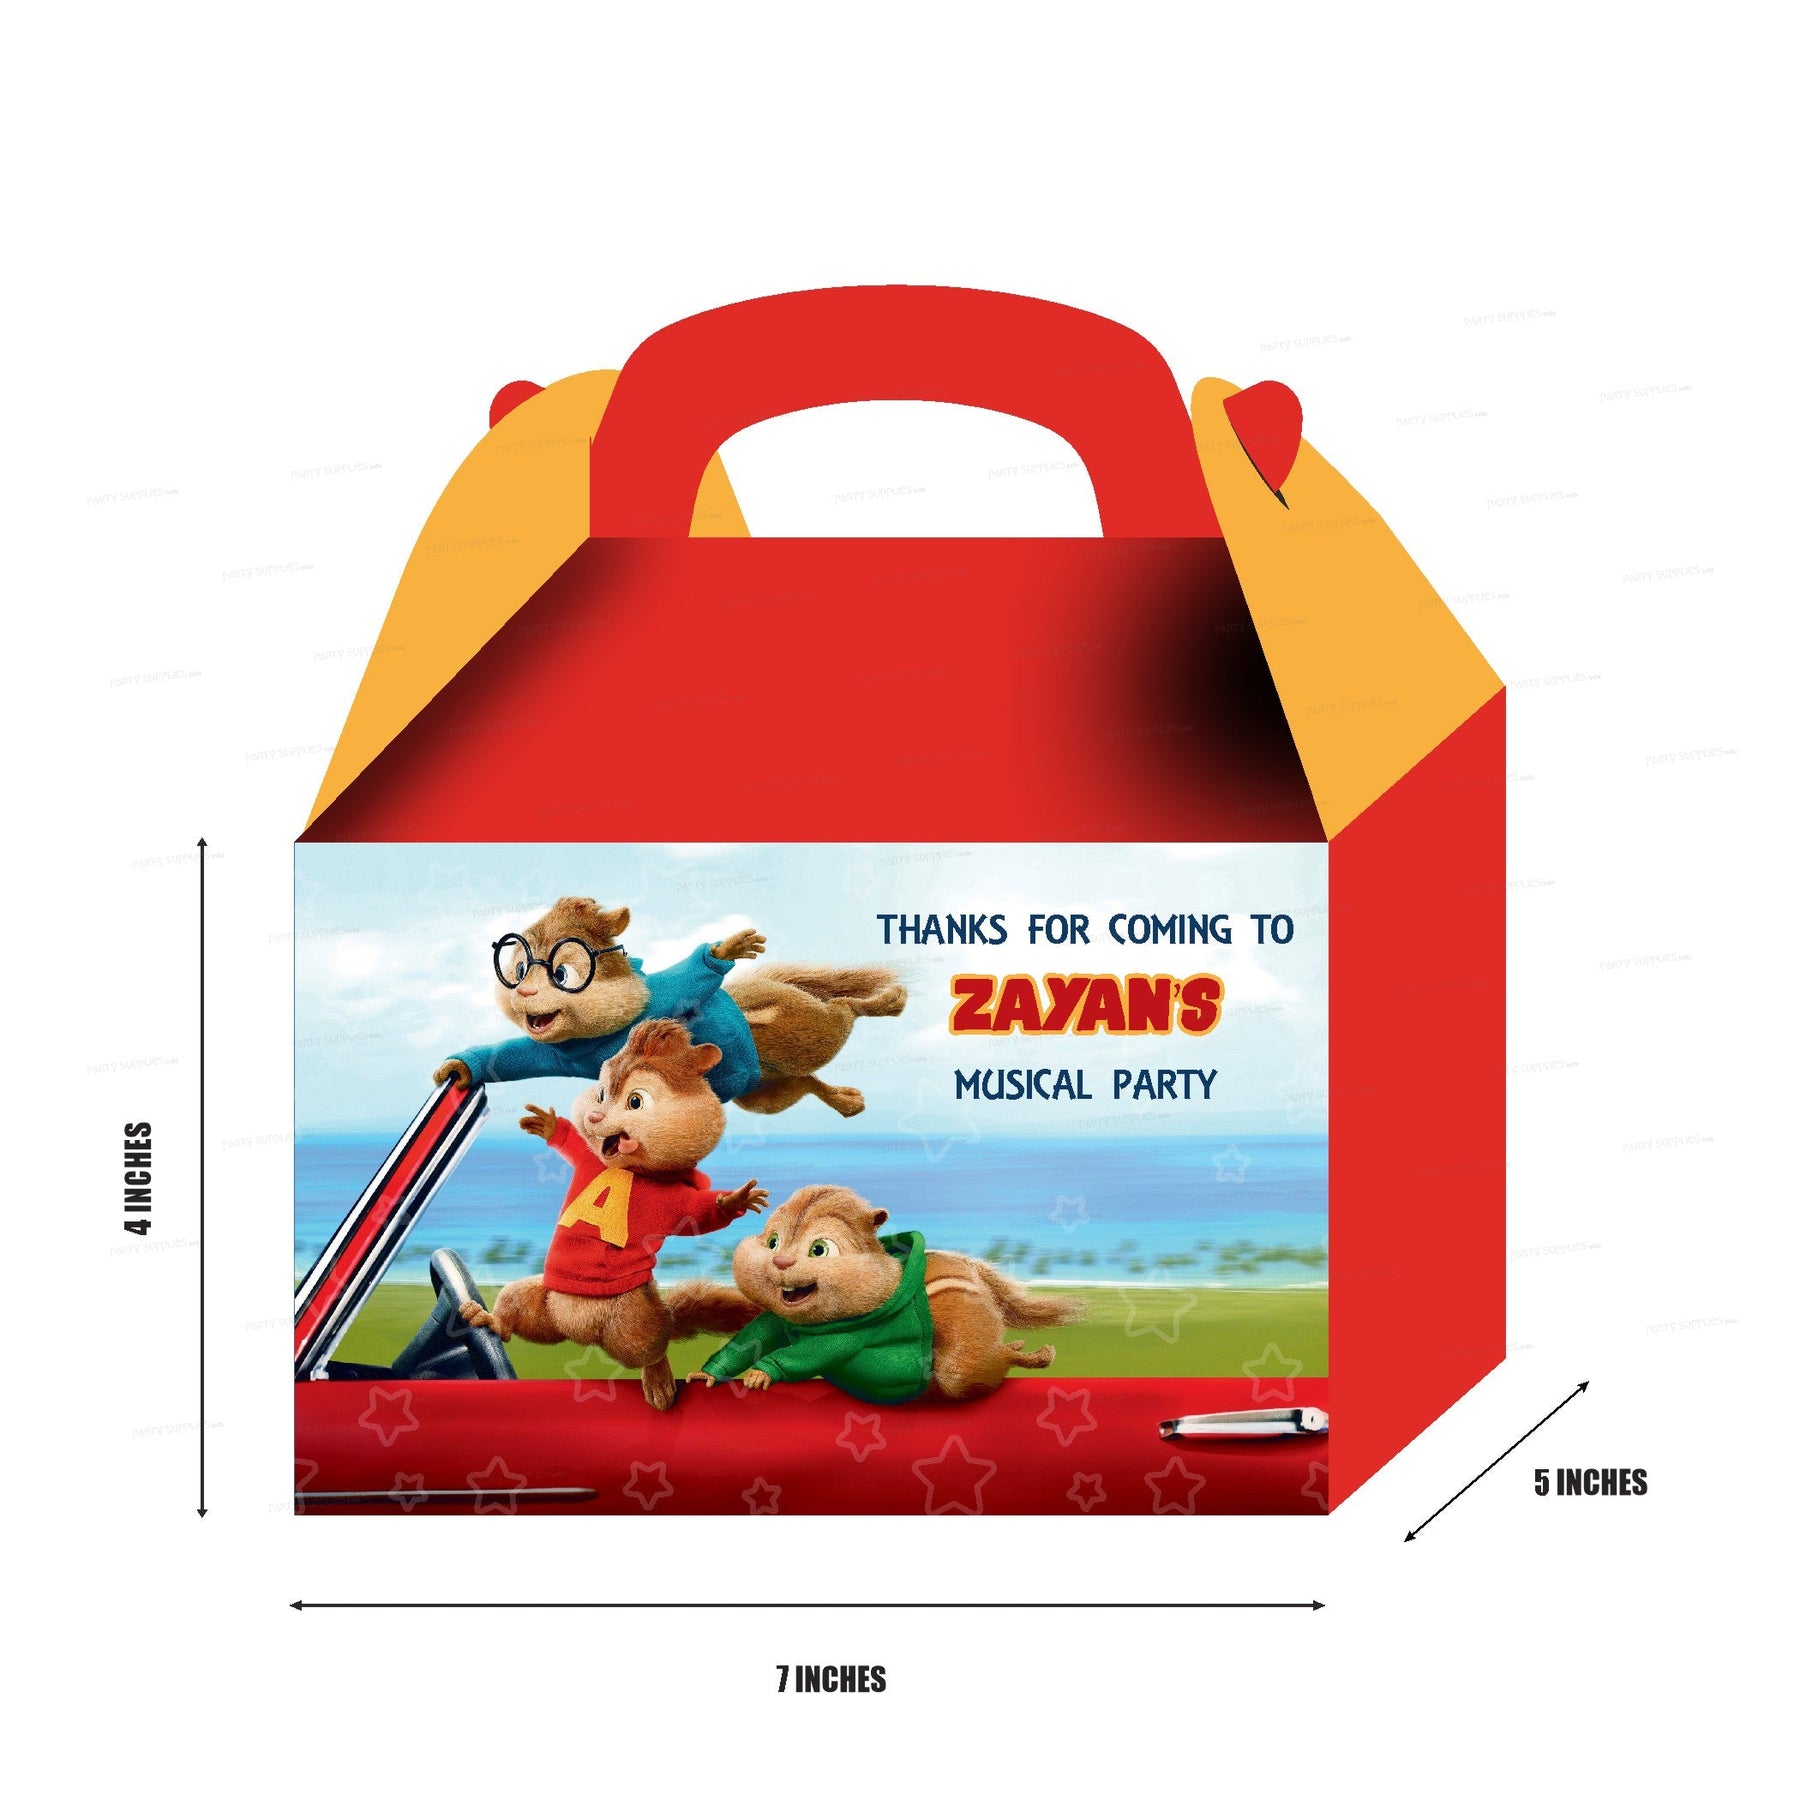 PSI Alvin and Chipmunks theme Goodie Return Gift Boxes